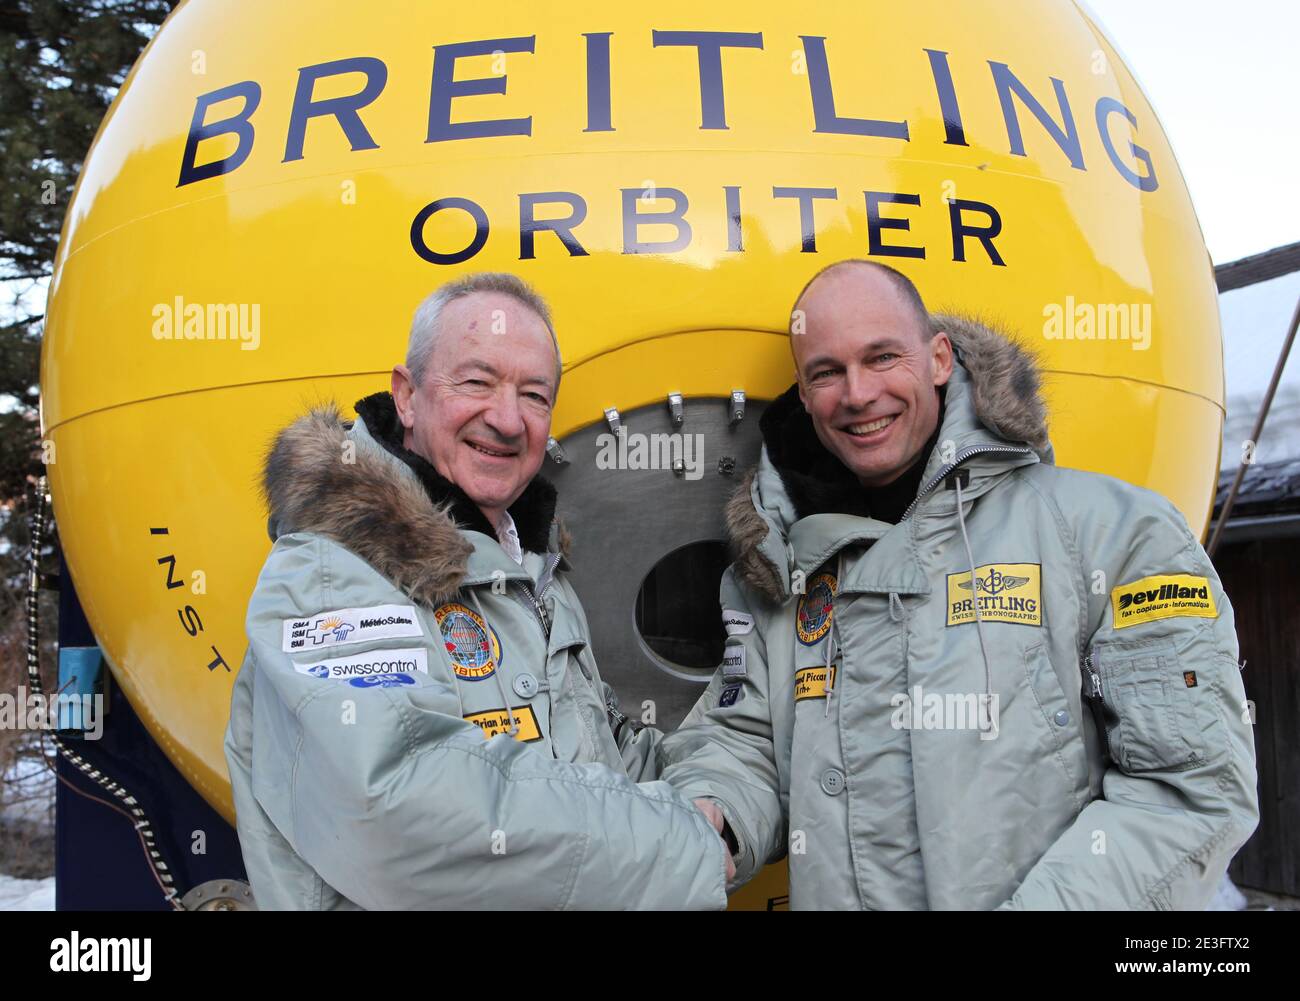 Brian Jones and Bertrand Piccard pose in Chateau-d'Oex, Switzerland on March 21, 2009. Bertrand Piccard (CH) and Brian Jones (GB) landed in the Egyptian desert on board the Breitling Orbiter 3. They had just completed the first non-stop round-the-world balloon flight, taking them 45,633 km from the Swiss village of Chateau-d'Oex in 19 days, 21 hours and 47 minutes. This flight, which broke 7 world records, remains the longest in effective distance and duration in the history of aviation. This 'Jules Verne dream', considered as the last great adventure of the 20th century, was initiated in the Stock Photo